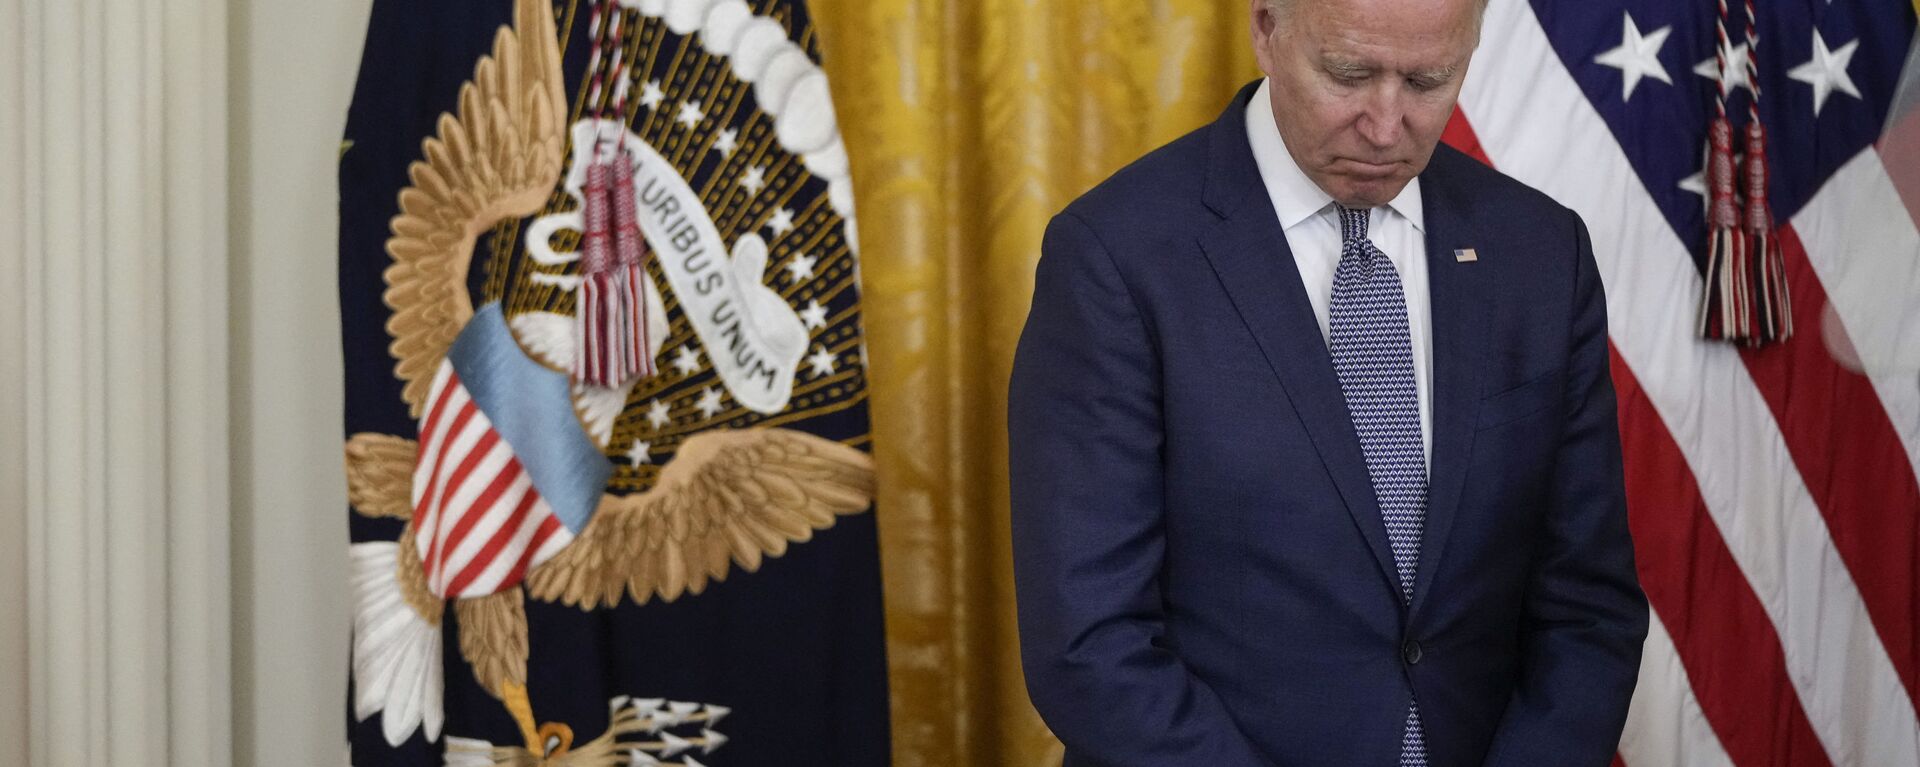 U.S. President Joe Biden waits to speak before signing the Juneteenth National Independence Day Act into law in the East Room of the White House on June 17, 2021 in Washington, DC. The Juneteenth holiday marks the end of slavery in the United States and the Juneteenth National Independence Day will become the 12th legal federal holiday — the first new one since Martin Luther King Jr. Day was signed into law in 1983. - Sputnik International, 1920, 14.08.2021